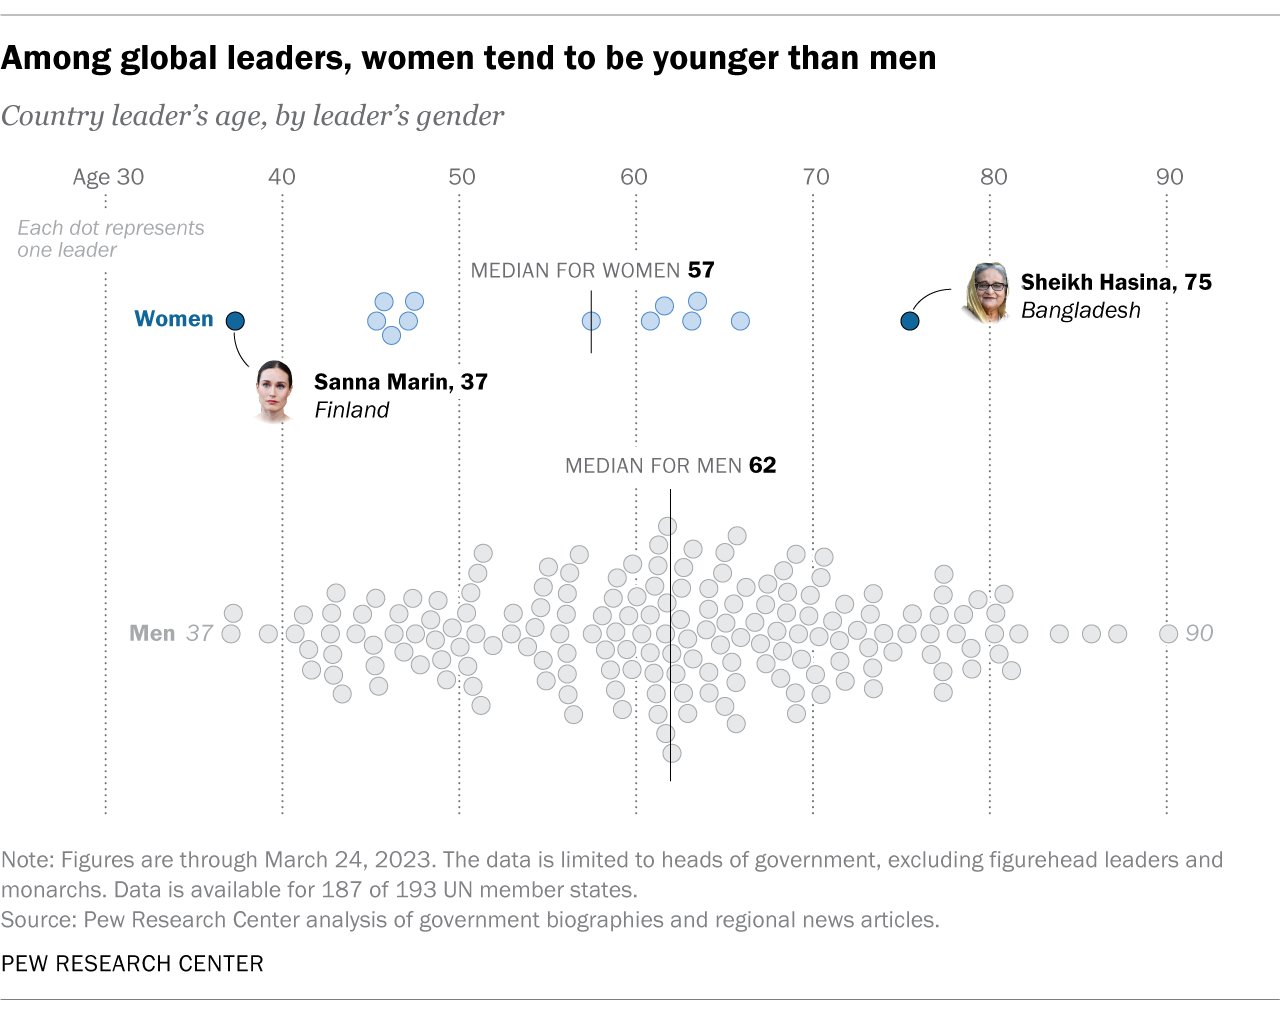 A chart showing that Among global leaders, women tend to be younger than men